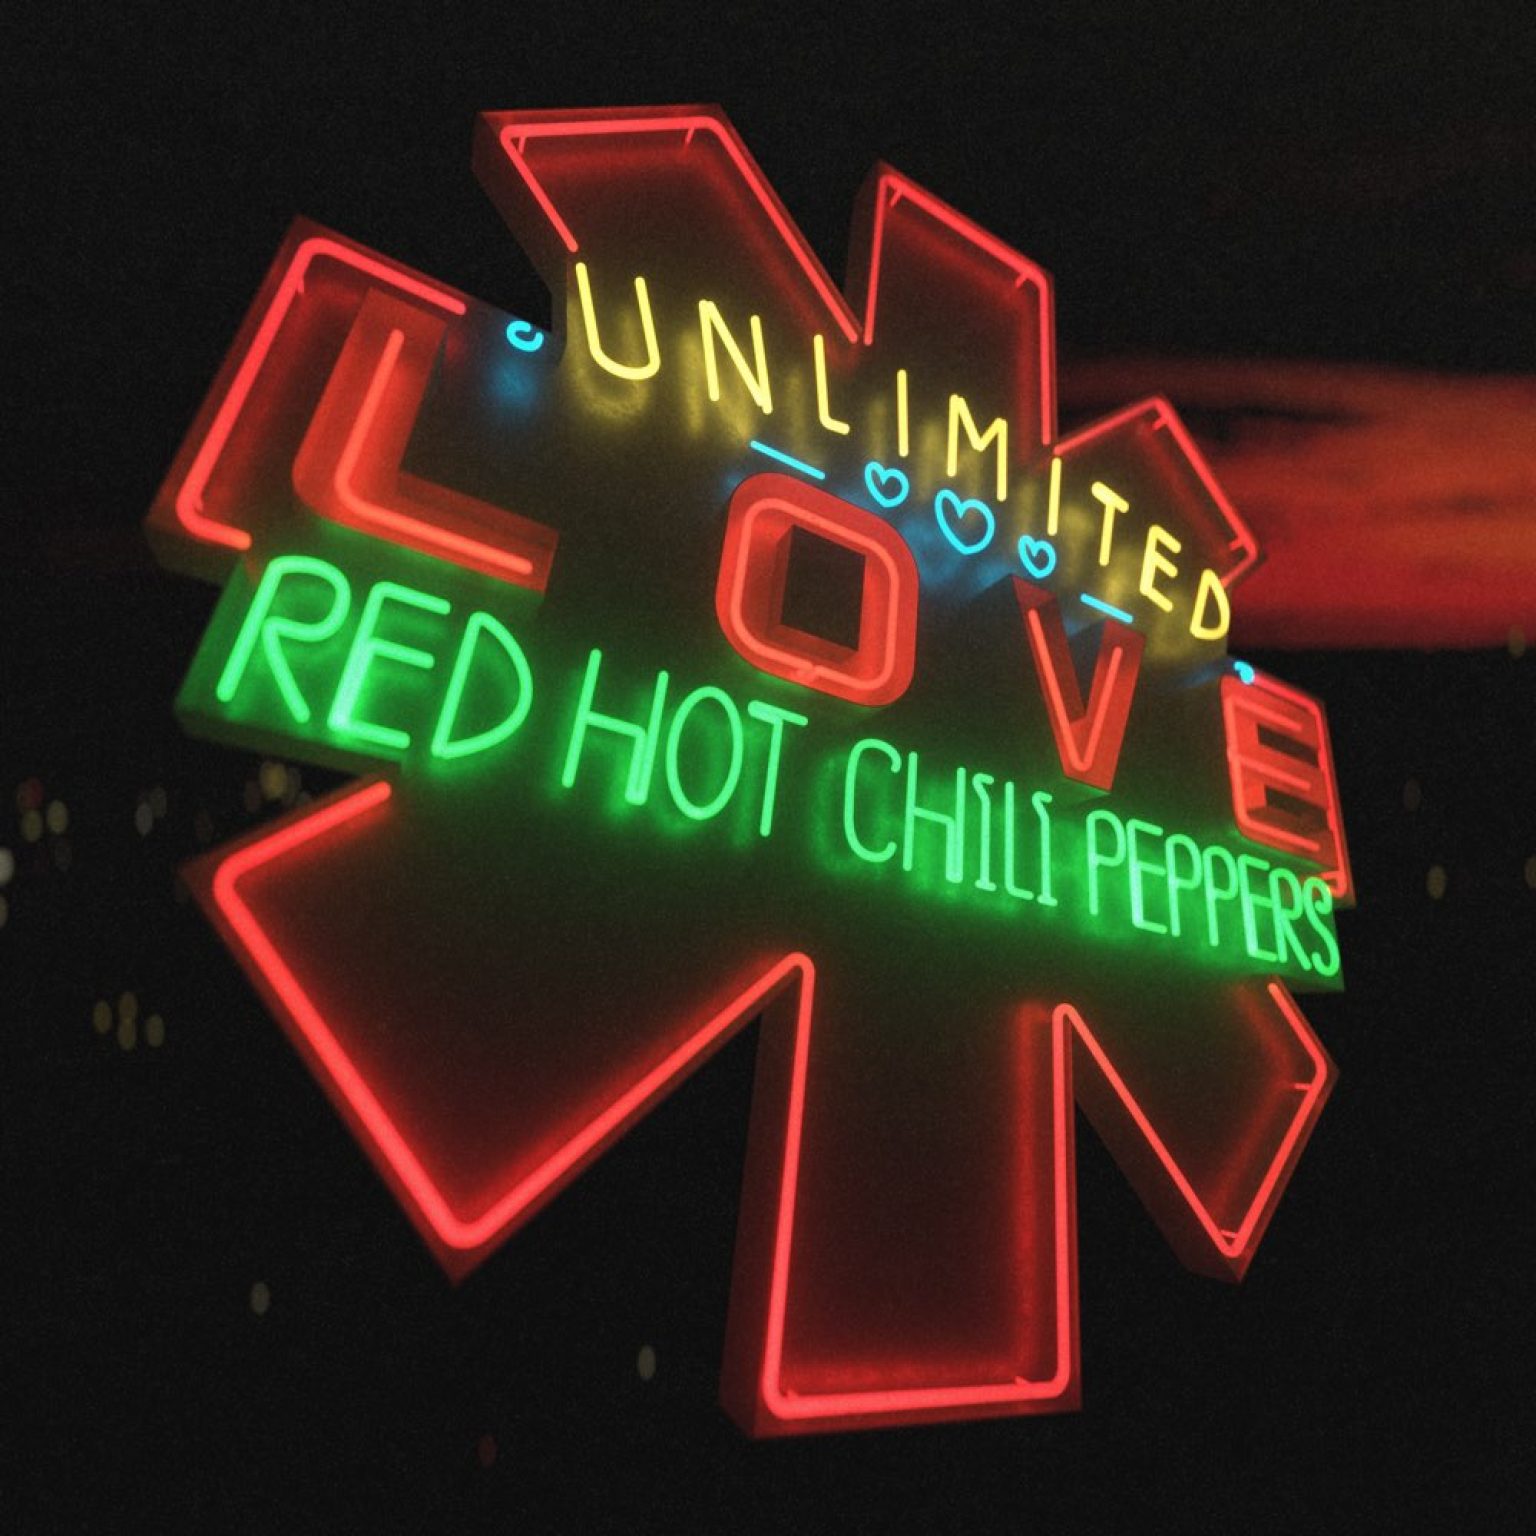 Indulge Your Sensual Side with Red Hot Chili Peppers Collectibles